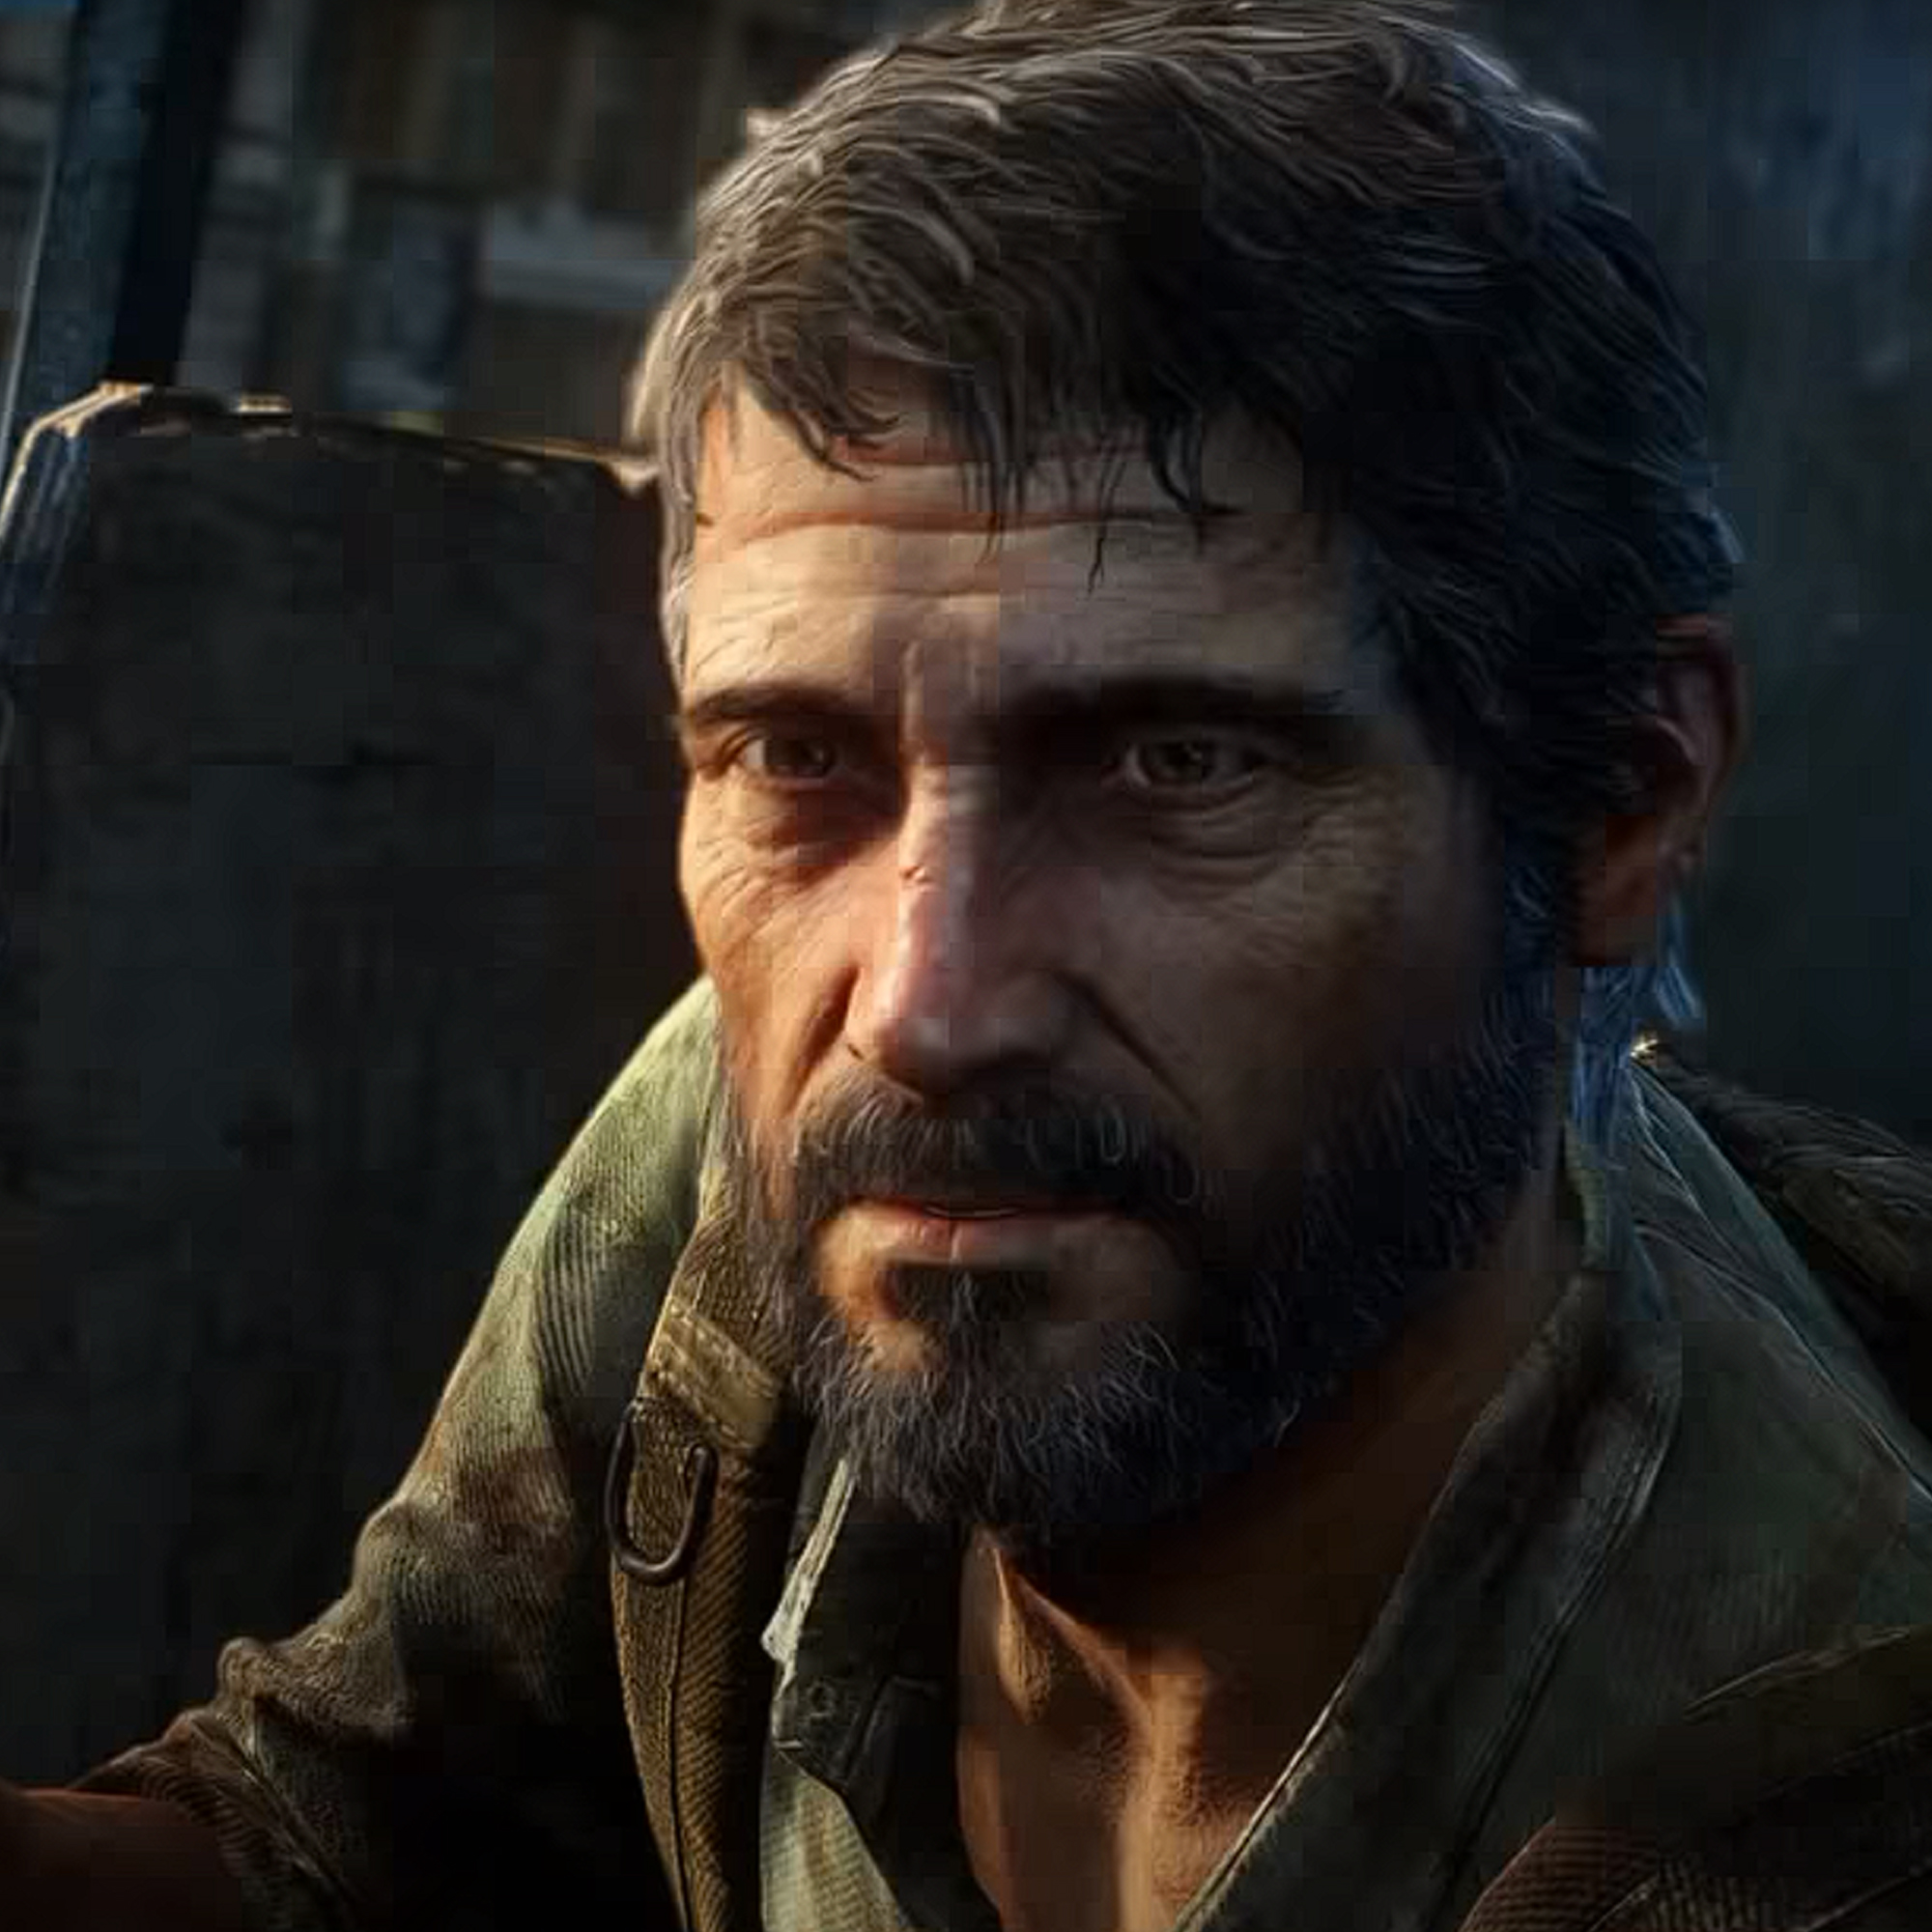 Joel from "The Last of Us" | Source: youtube.com/Playstation